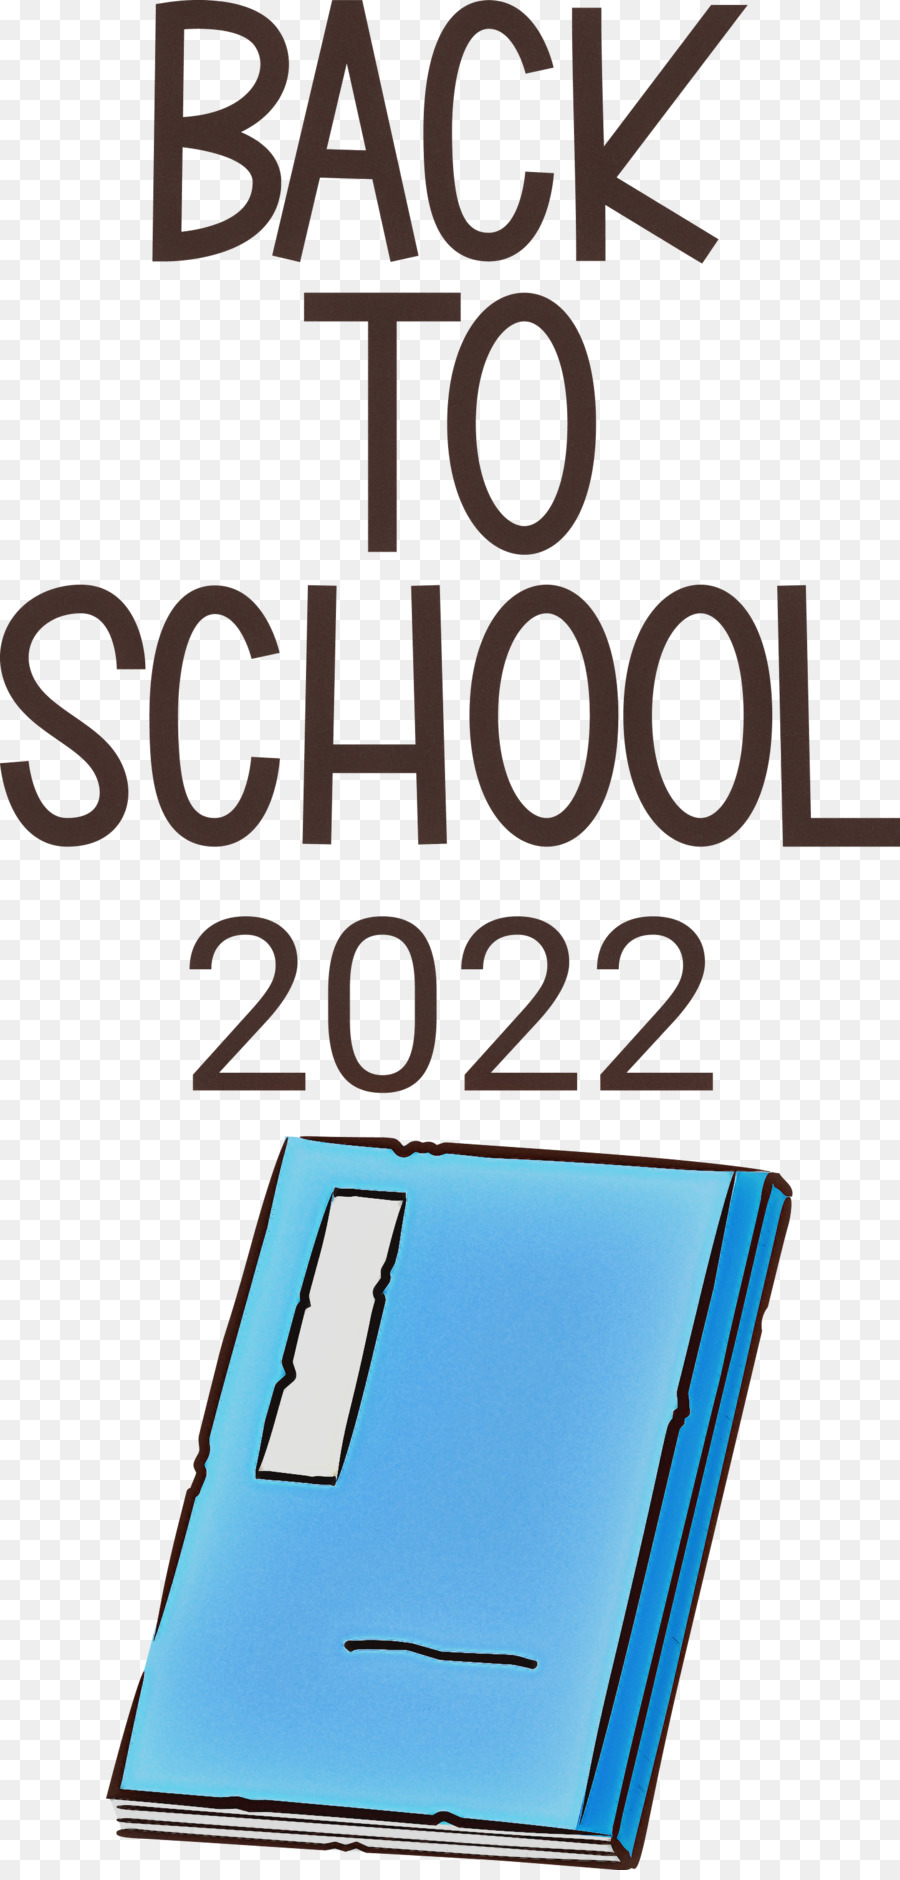 Back to school 2022 Education